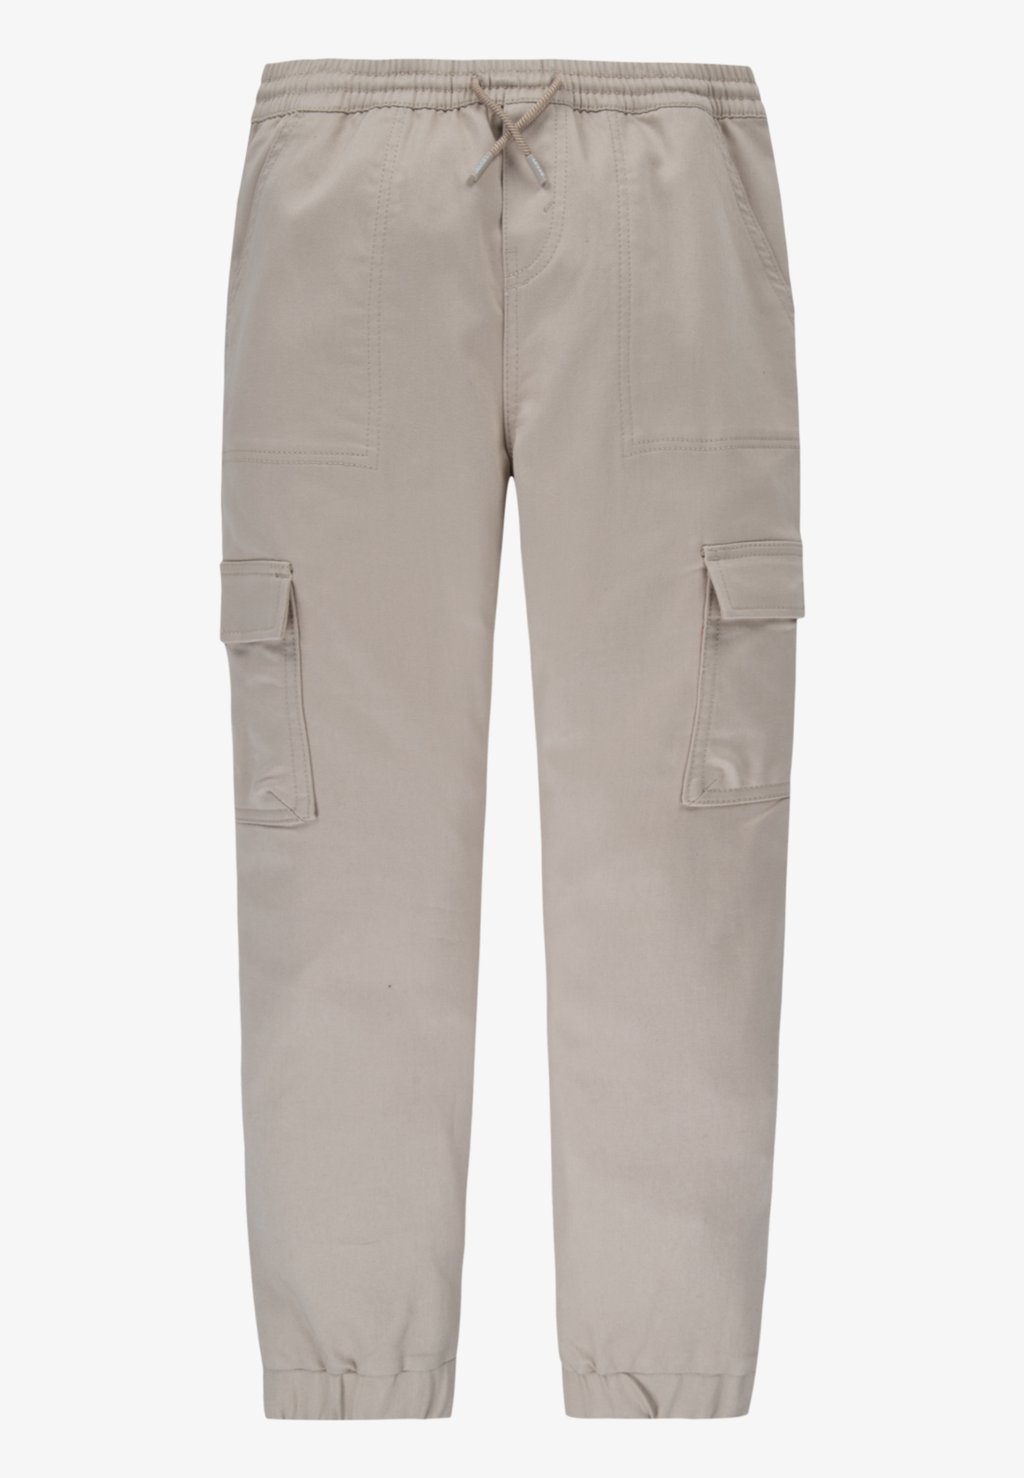 Брюки карго RELAXED TROUSER Levi's, цвет oxford tan